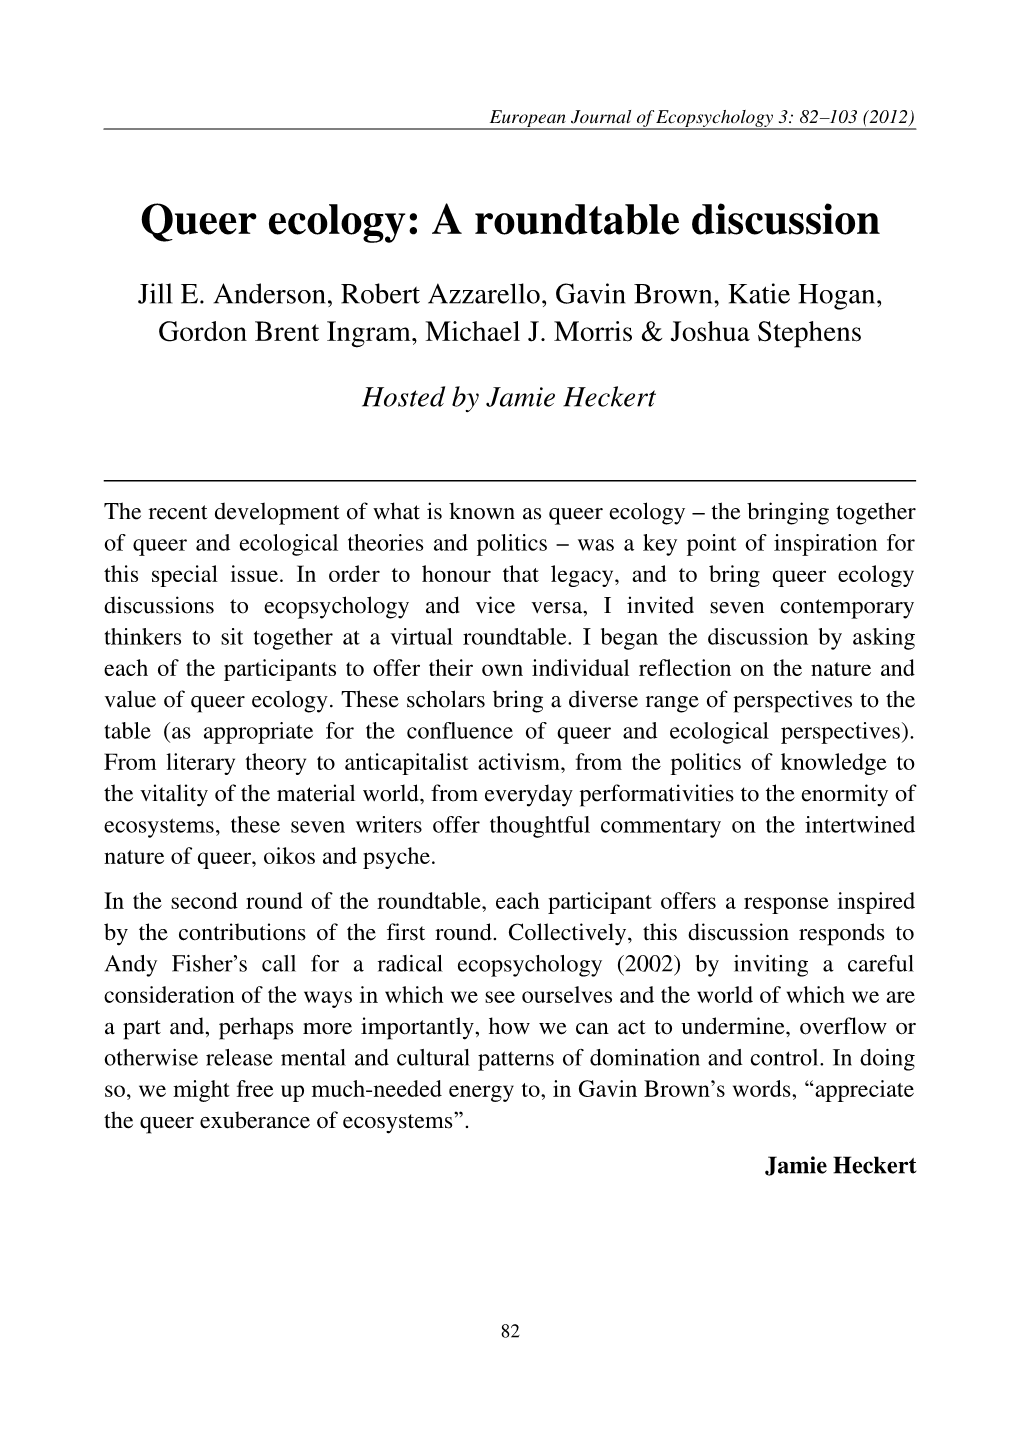 Queer Ecology: a Roundtable Discussion